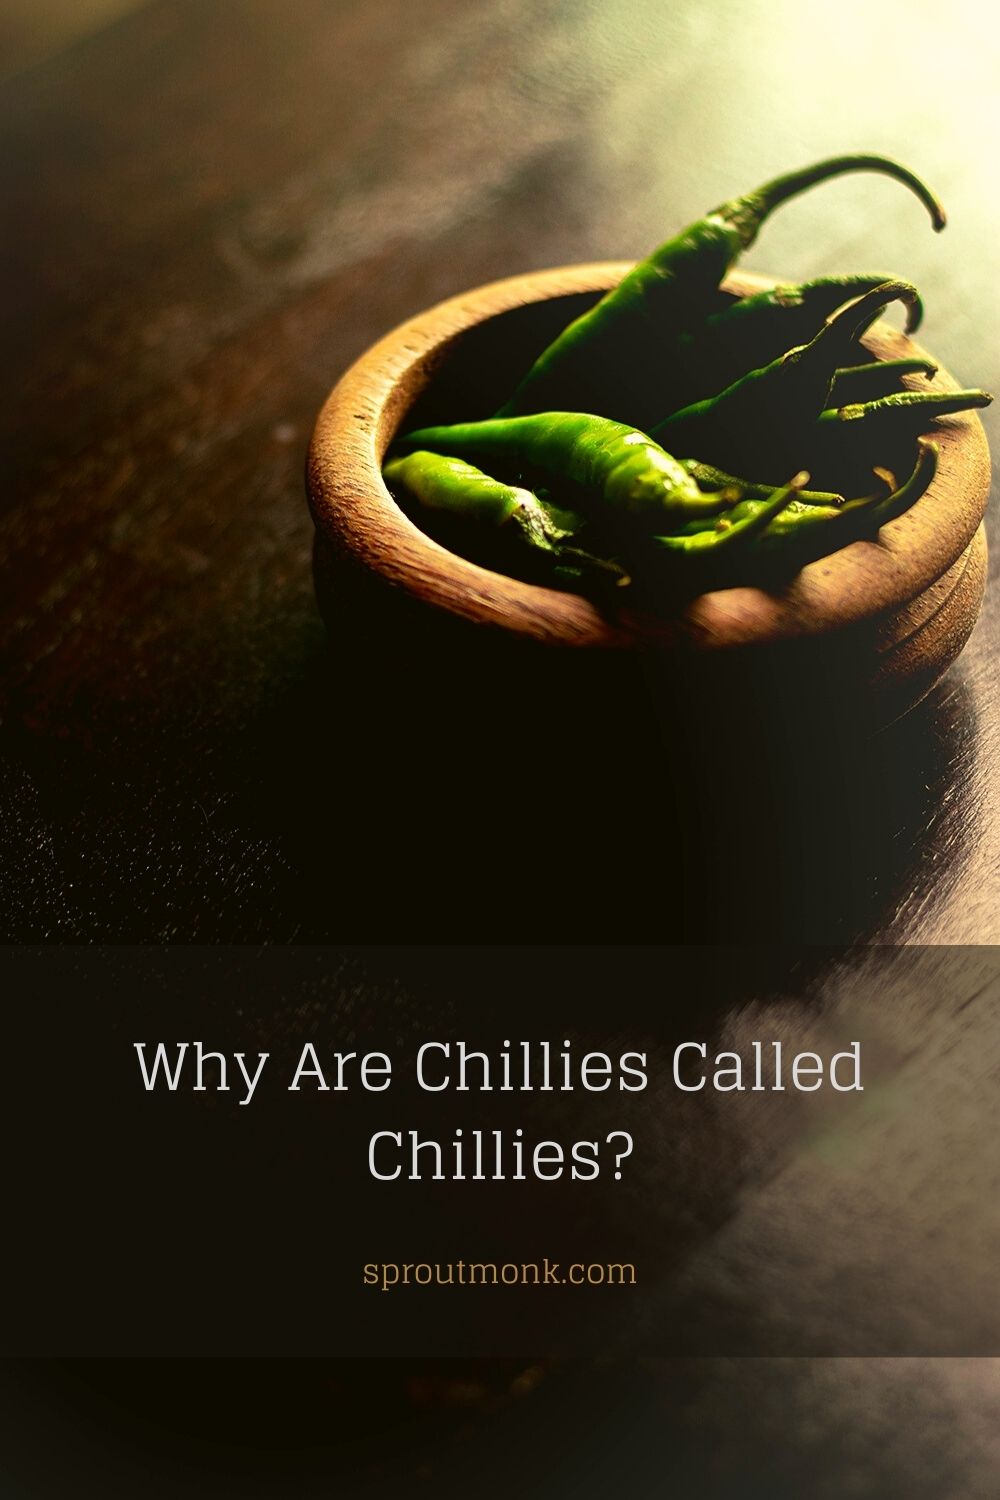 Do you want to know why chillies are called chillies? Read this insightful guide on its history and origin in Central America.